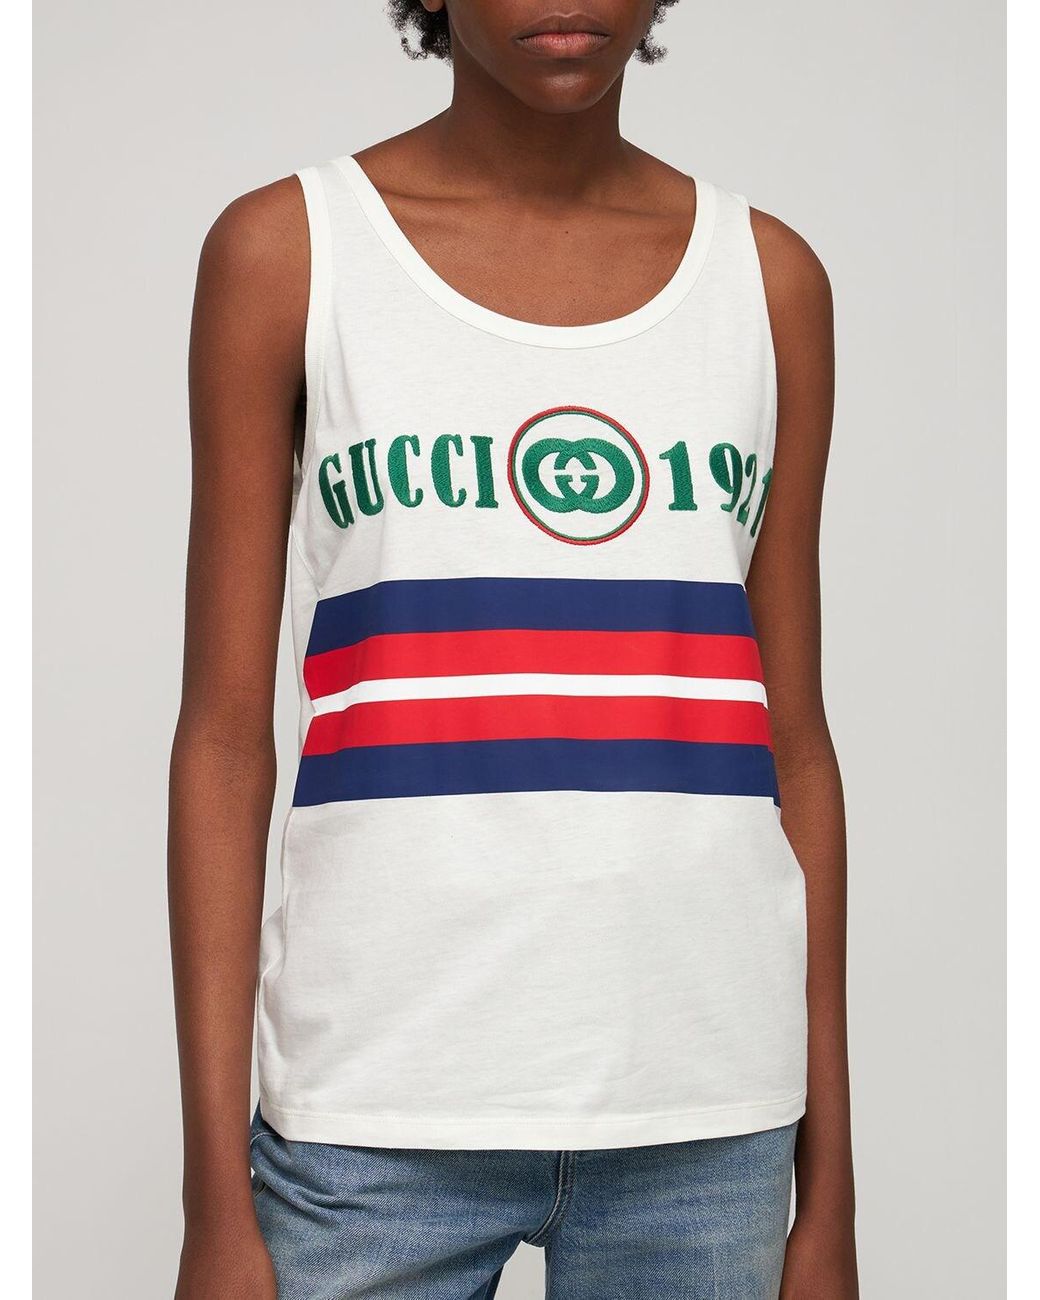 Gucci Embroidered Cotton Jersey Tank Top